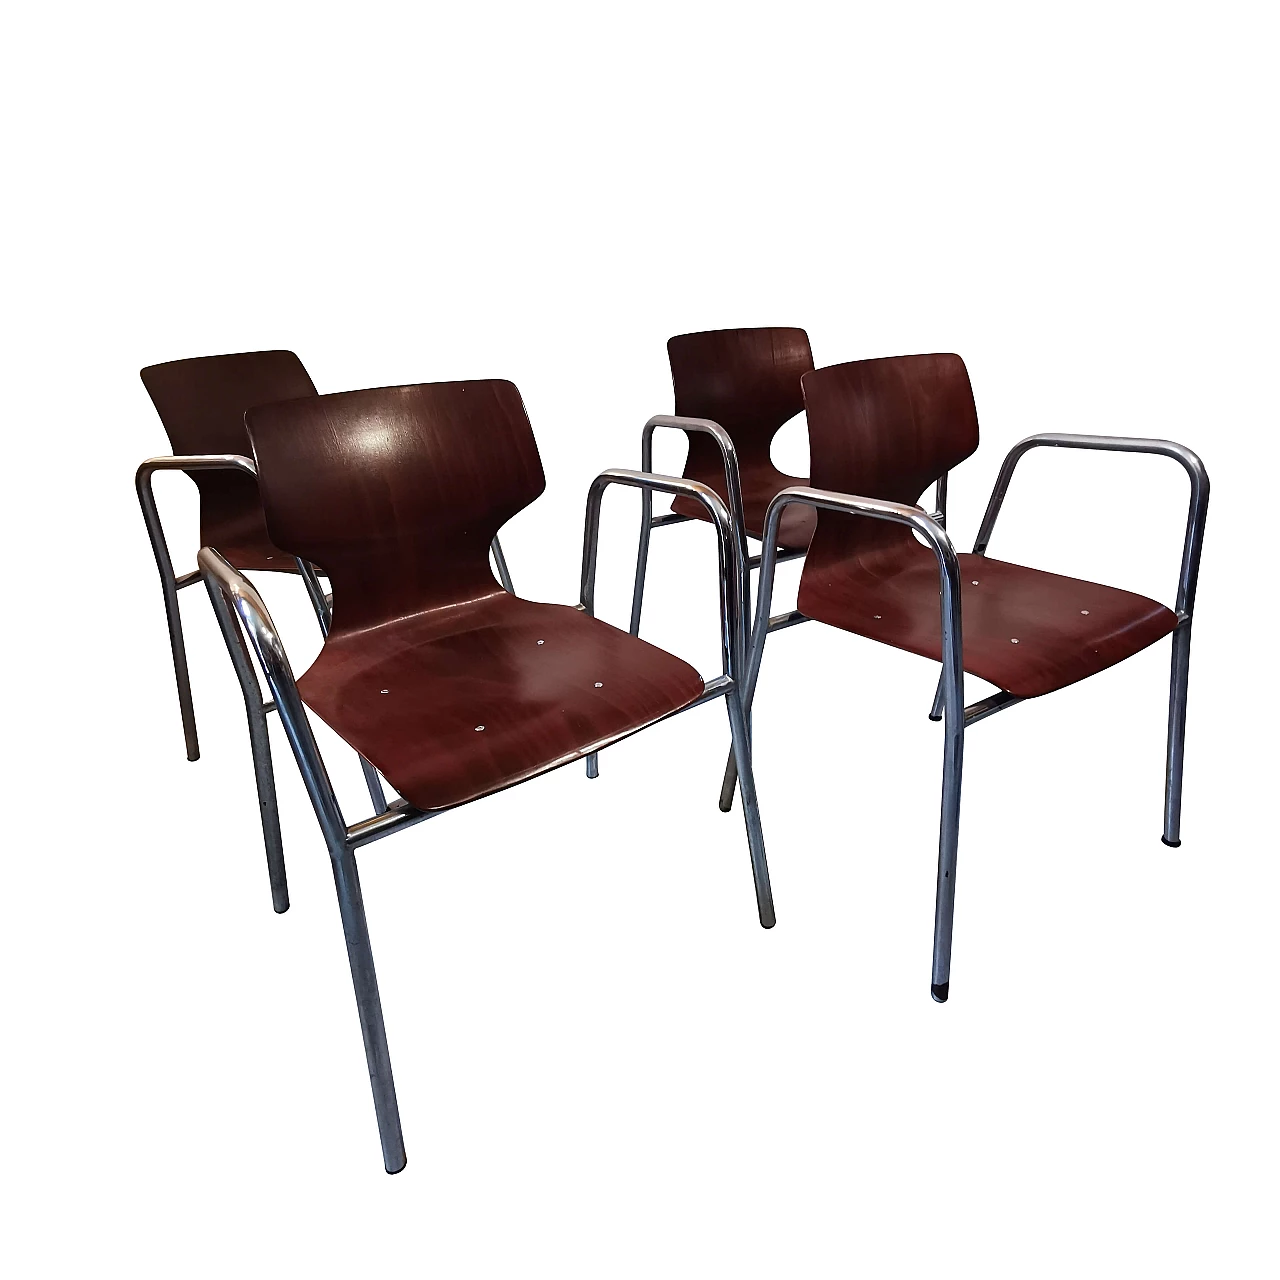 4 Pagholz chairs with armrests by Flototto, 60s 1149290